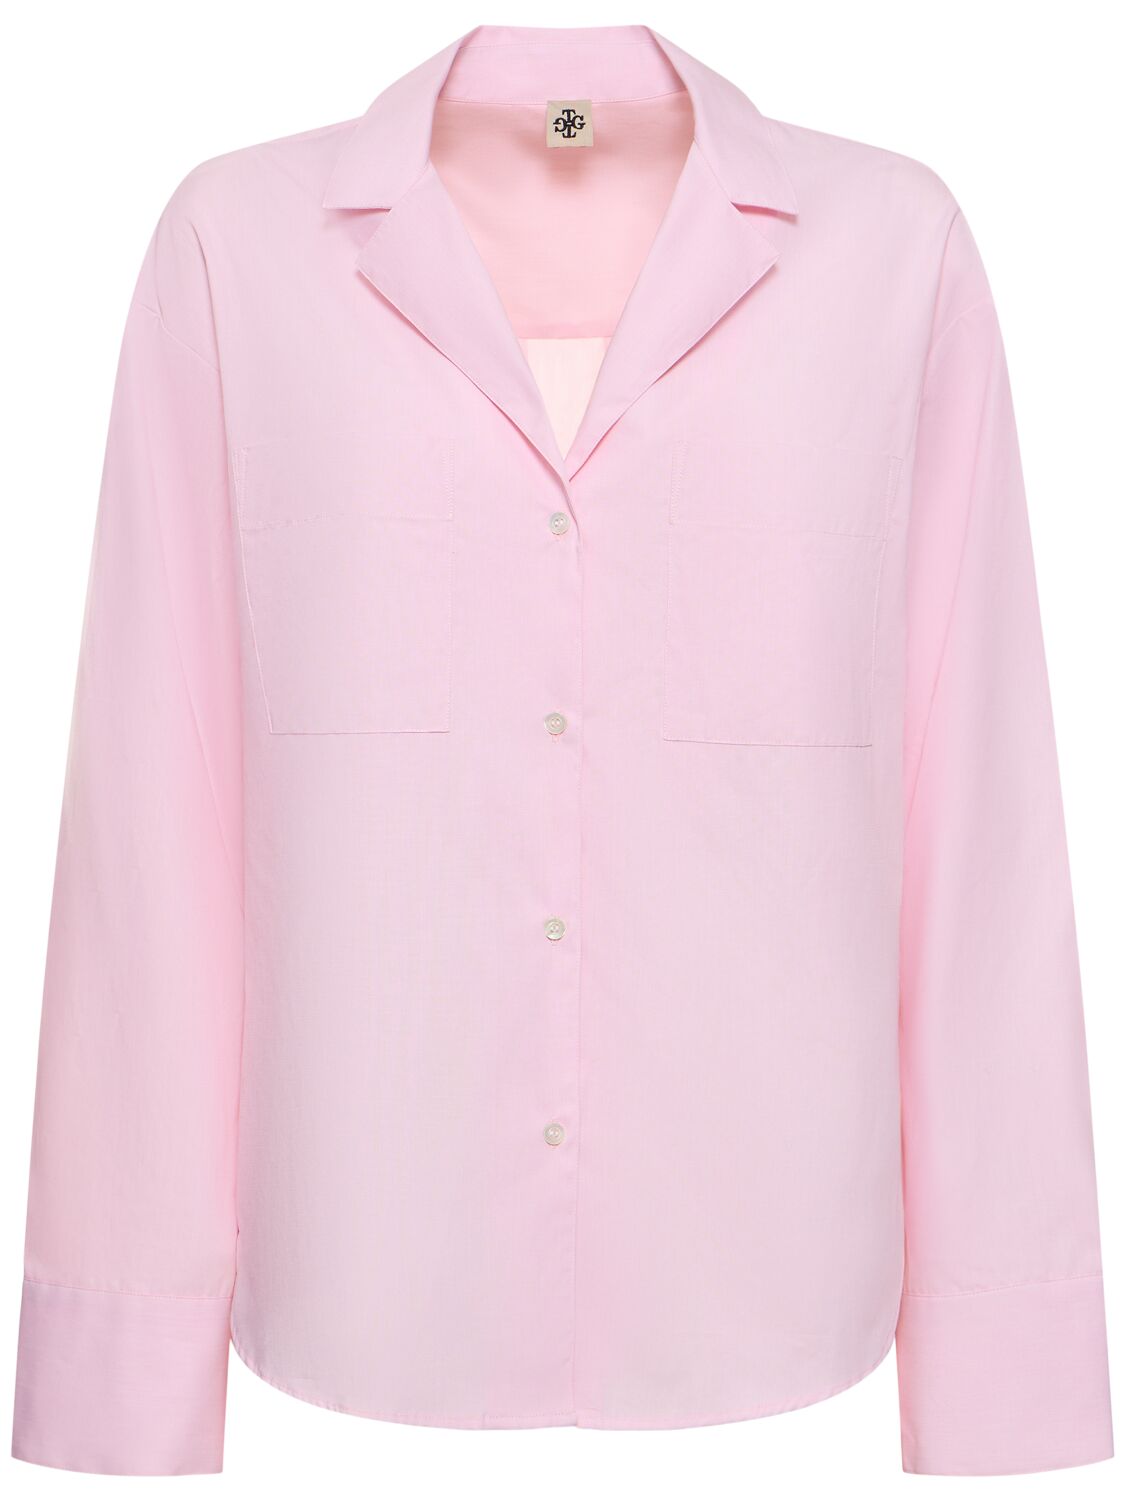 The Garment Madrid Cotton Shirt In Baby Pink